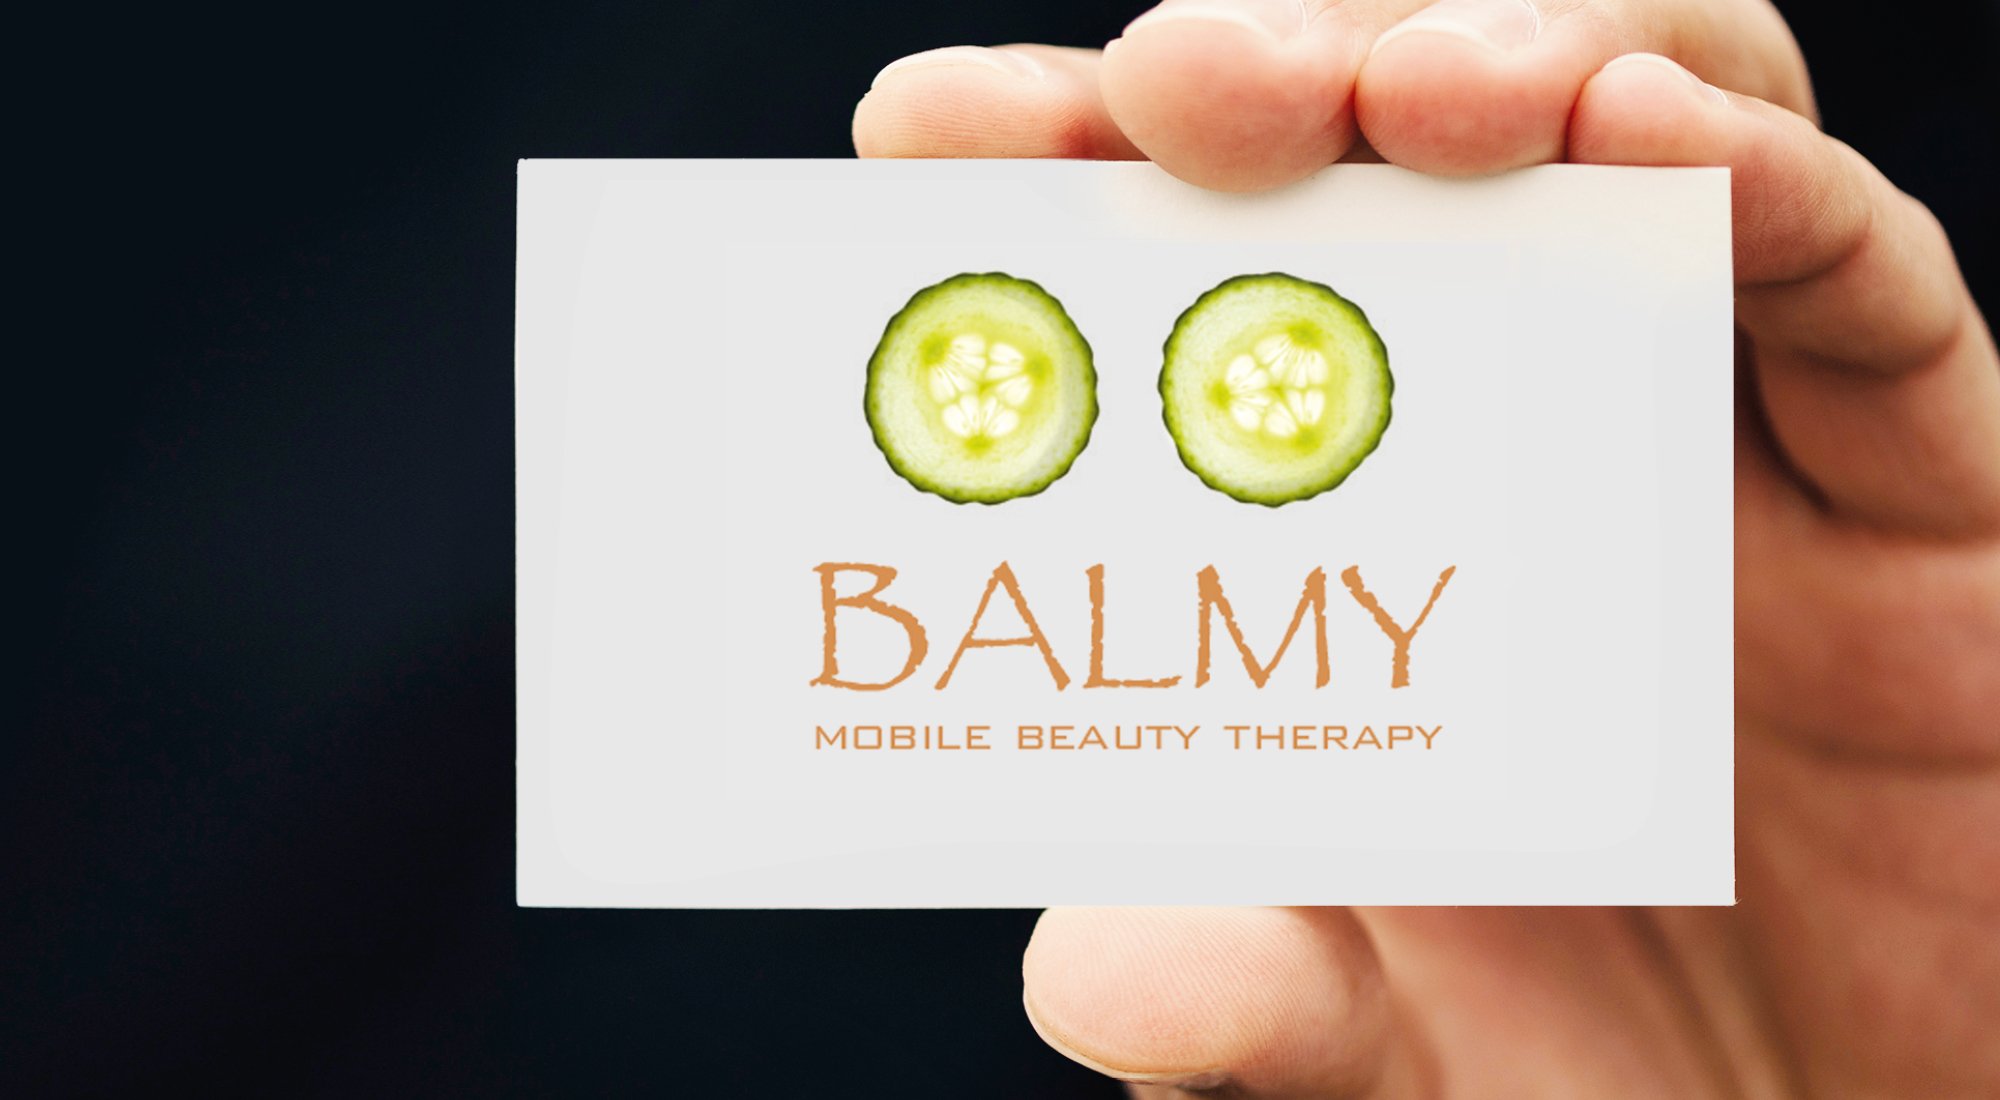 Balmy Mobile Beauty Therapy Alison Leavers Bishops Stortford